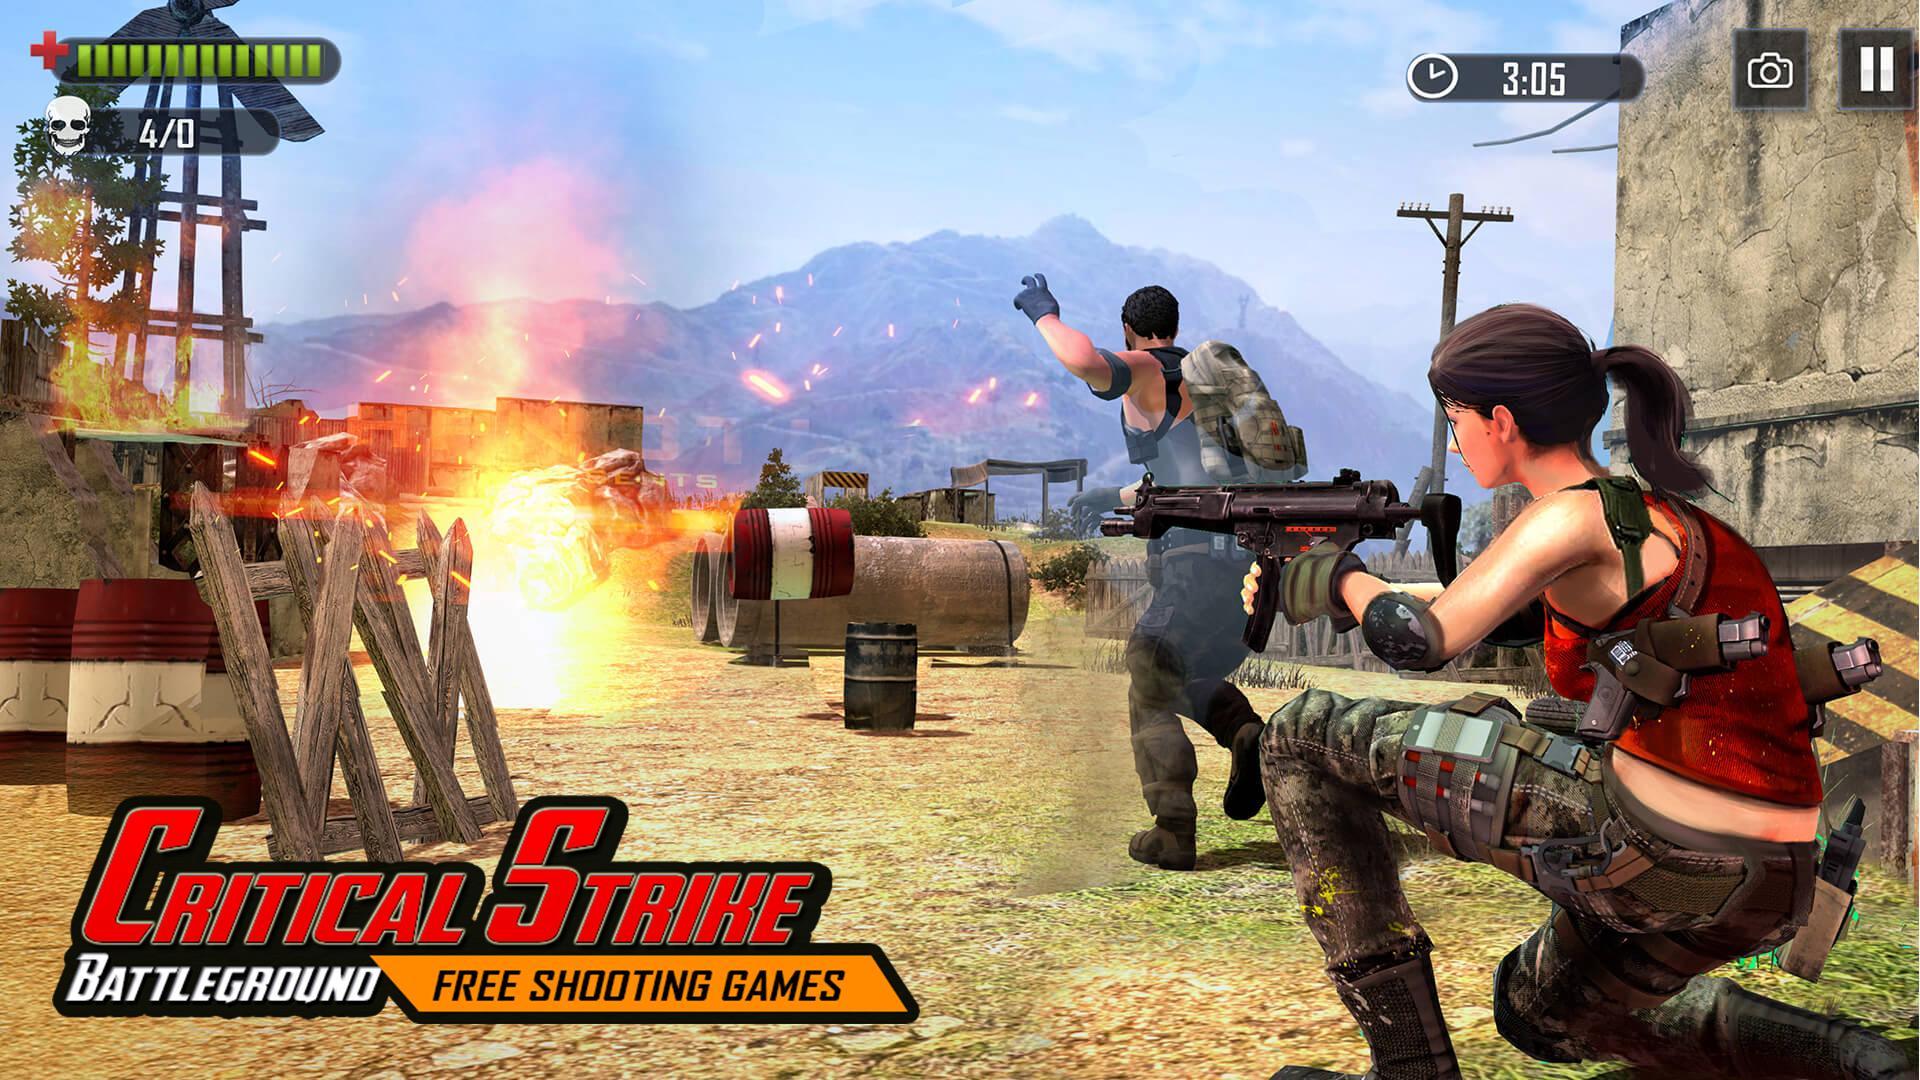 Battleground Fire Free Shooting Games 2020 For Android Apk